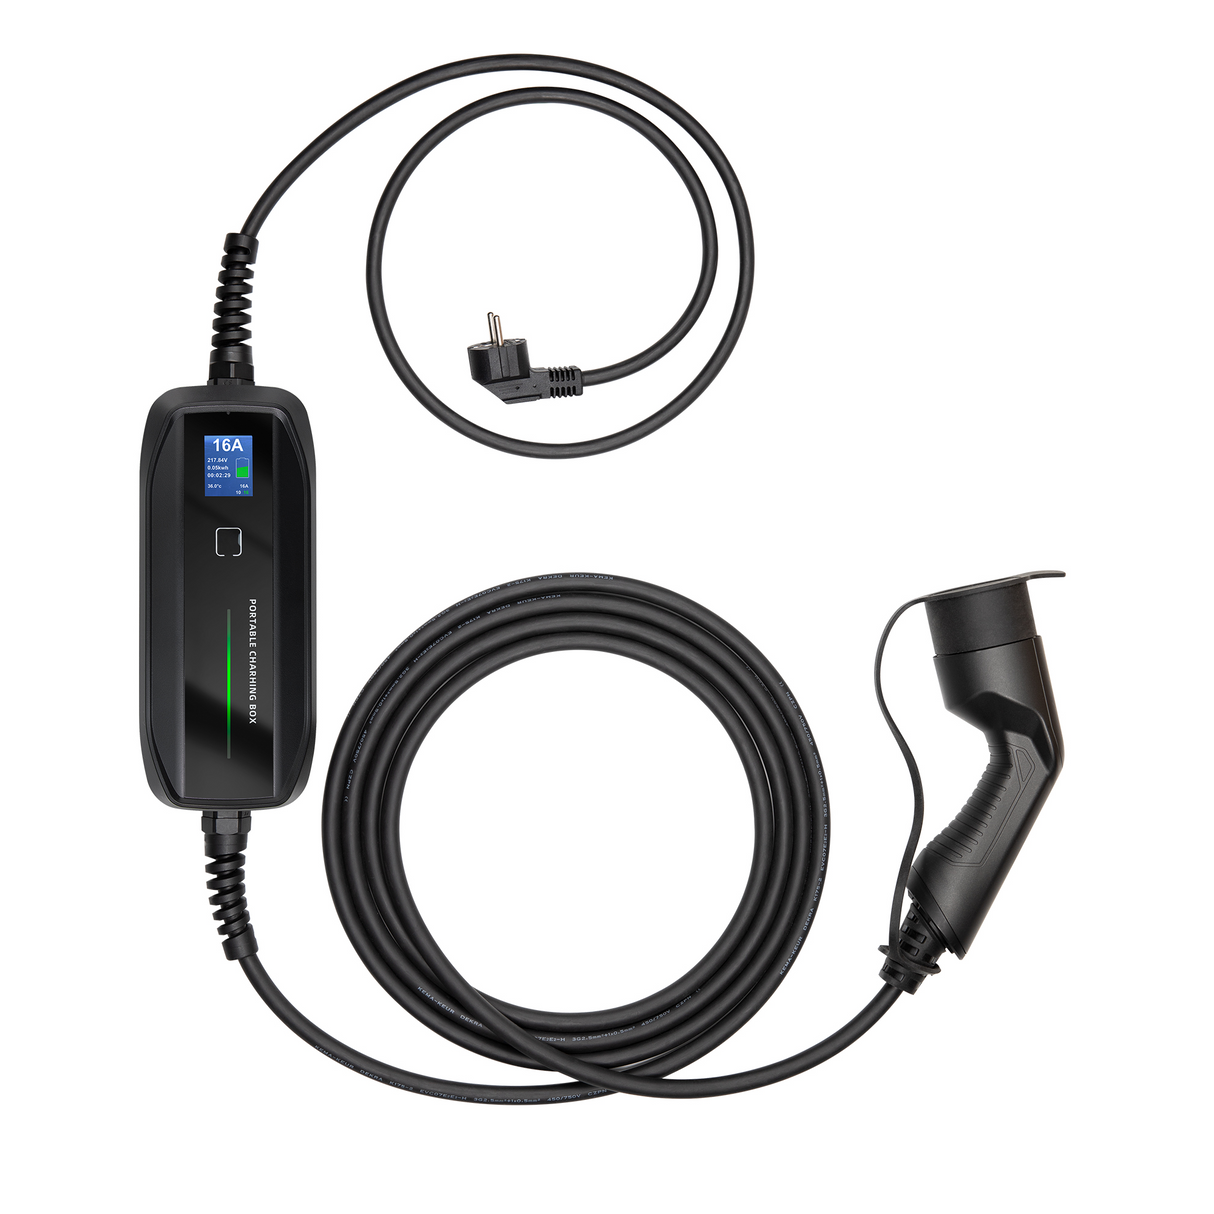 Mobile Charger Honda e - Besen with LCD - Type 2 to Schuko